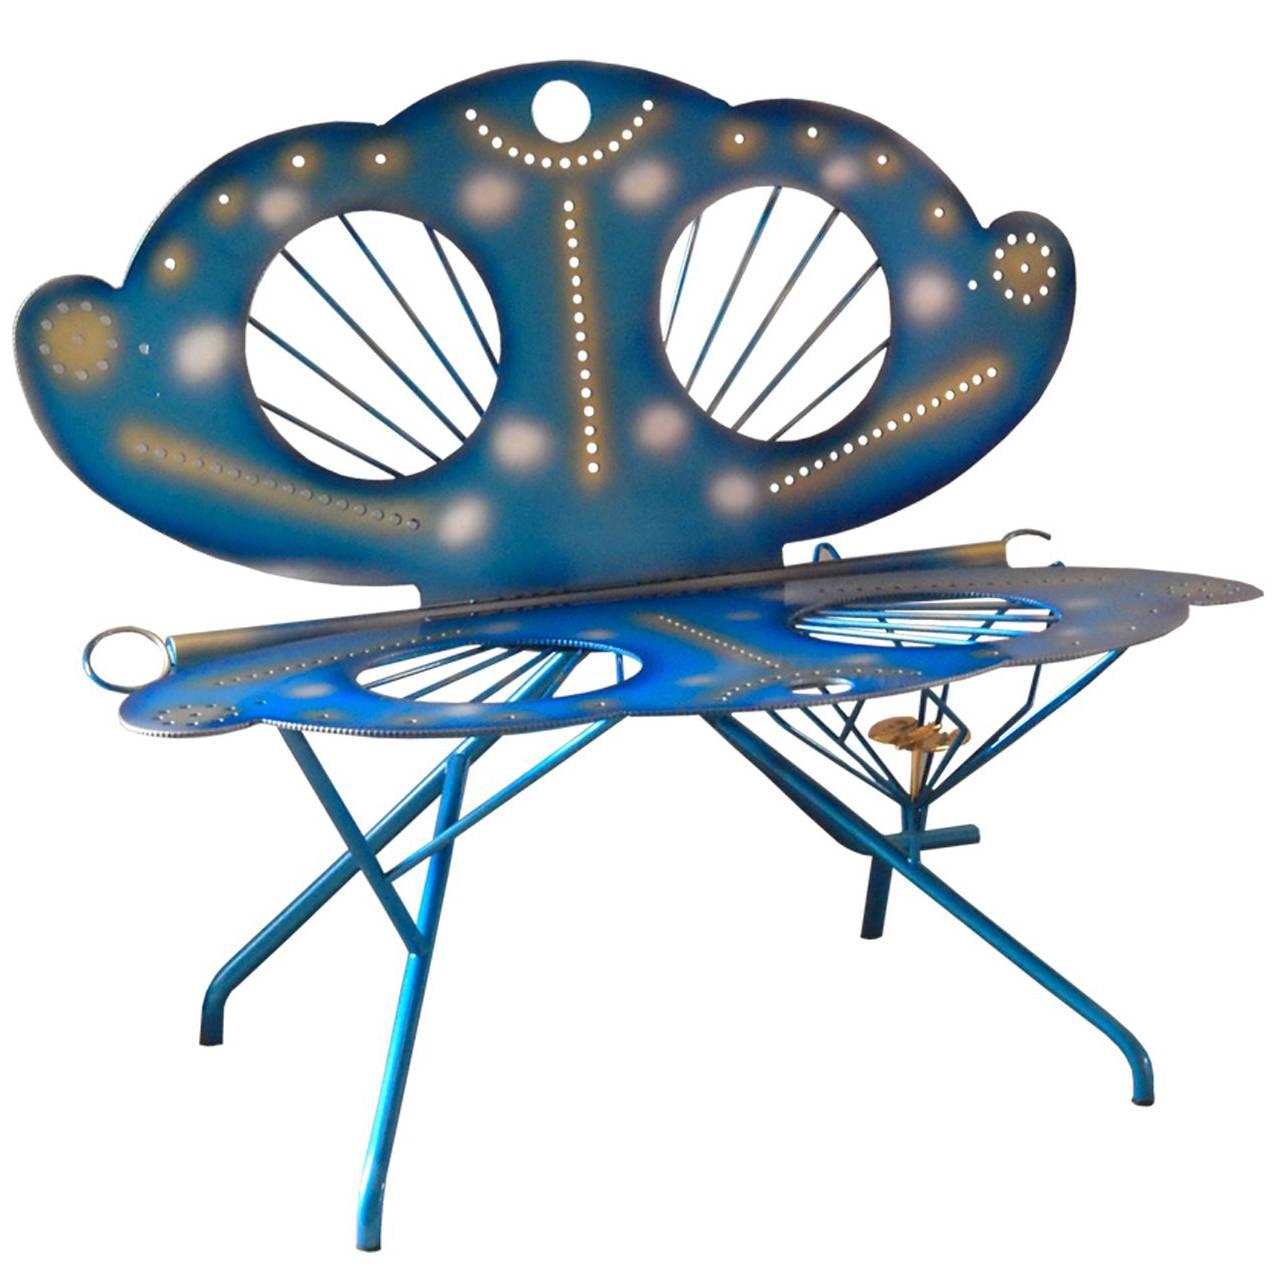 Post-Modern Italian Zanotta R. Dalisi Blue Painted Steel Bench, Limited Edition For Sale